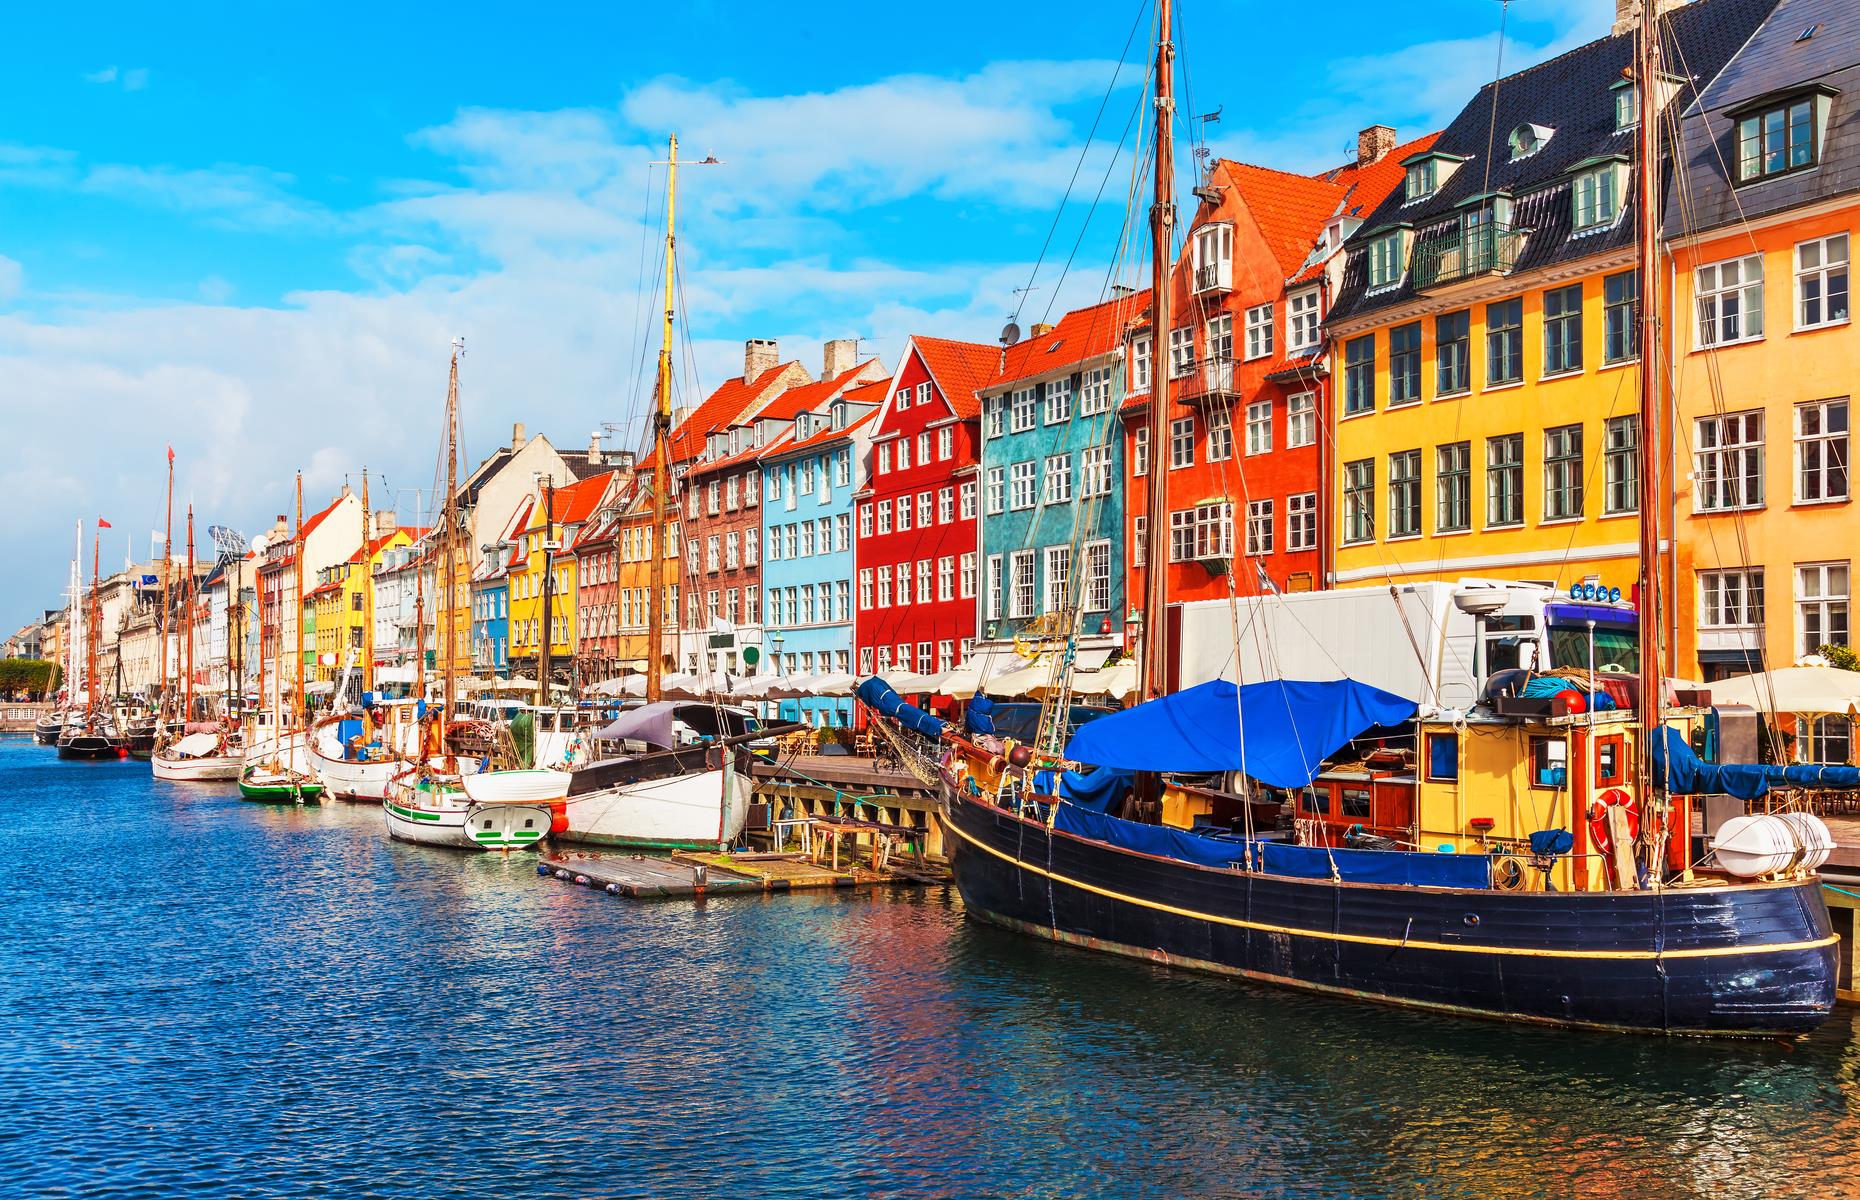 <p>Although Scandi noir crime dramas might convince you otherwise, Denmark is one of the world’s safest countries. It scored particularly highly in the safety and security index, meaning that citizens and tourists can generally wander by night and day free from harm.</p>